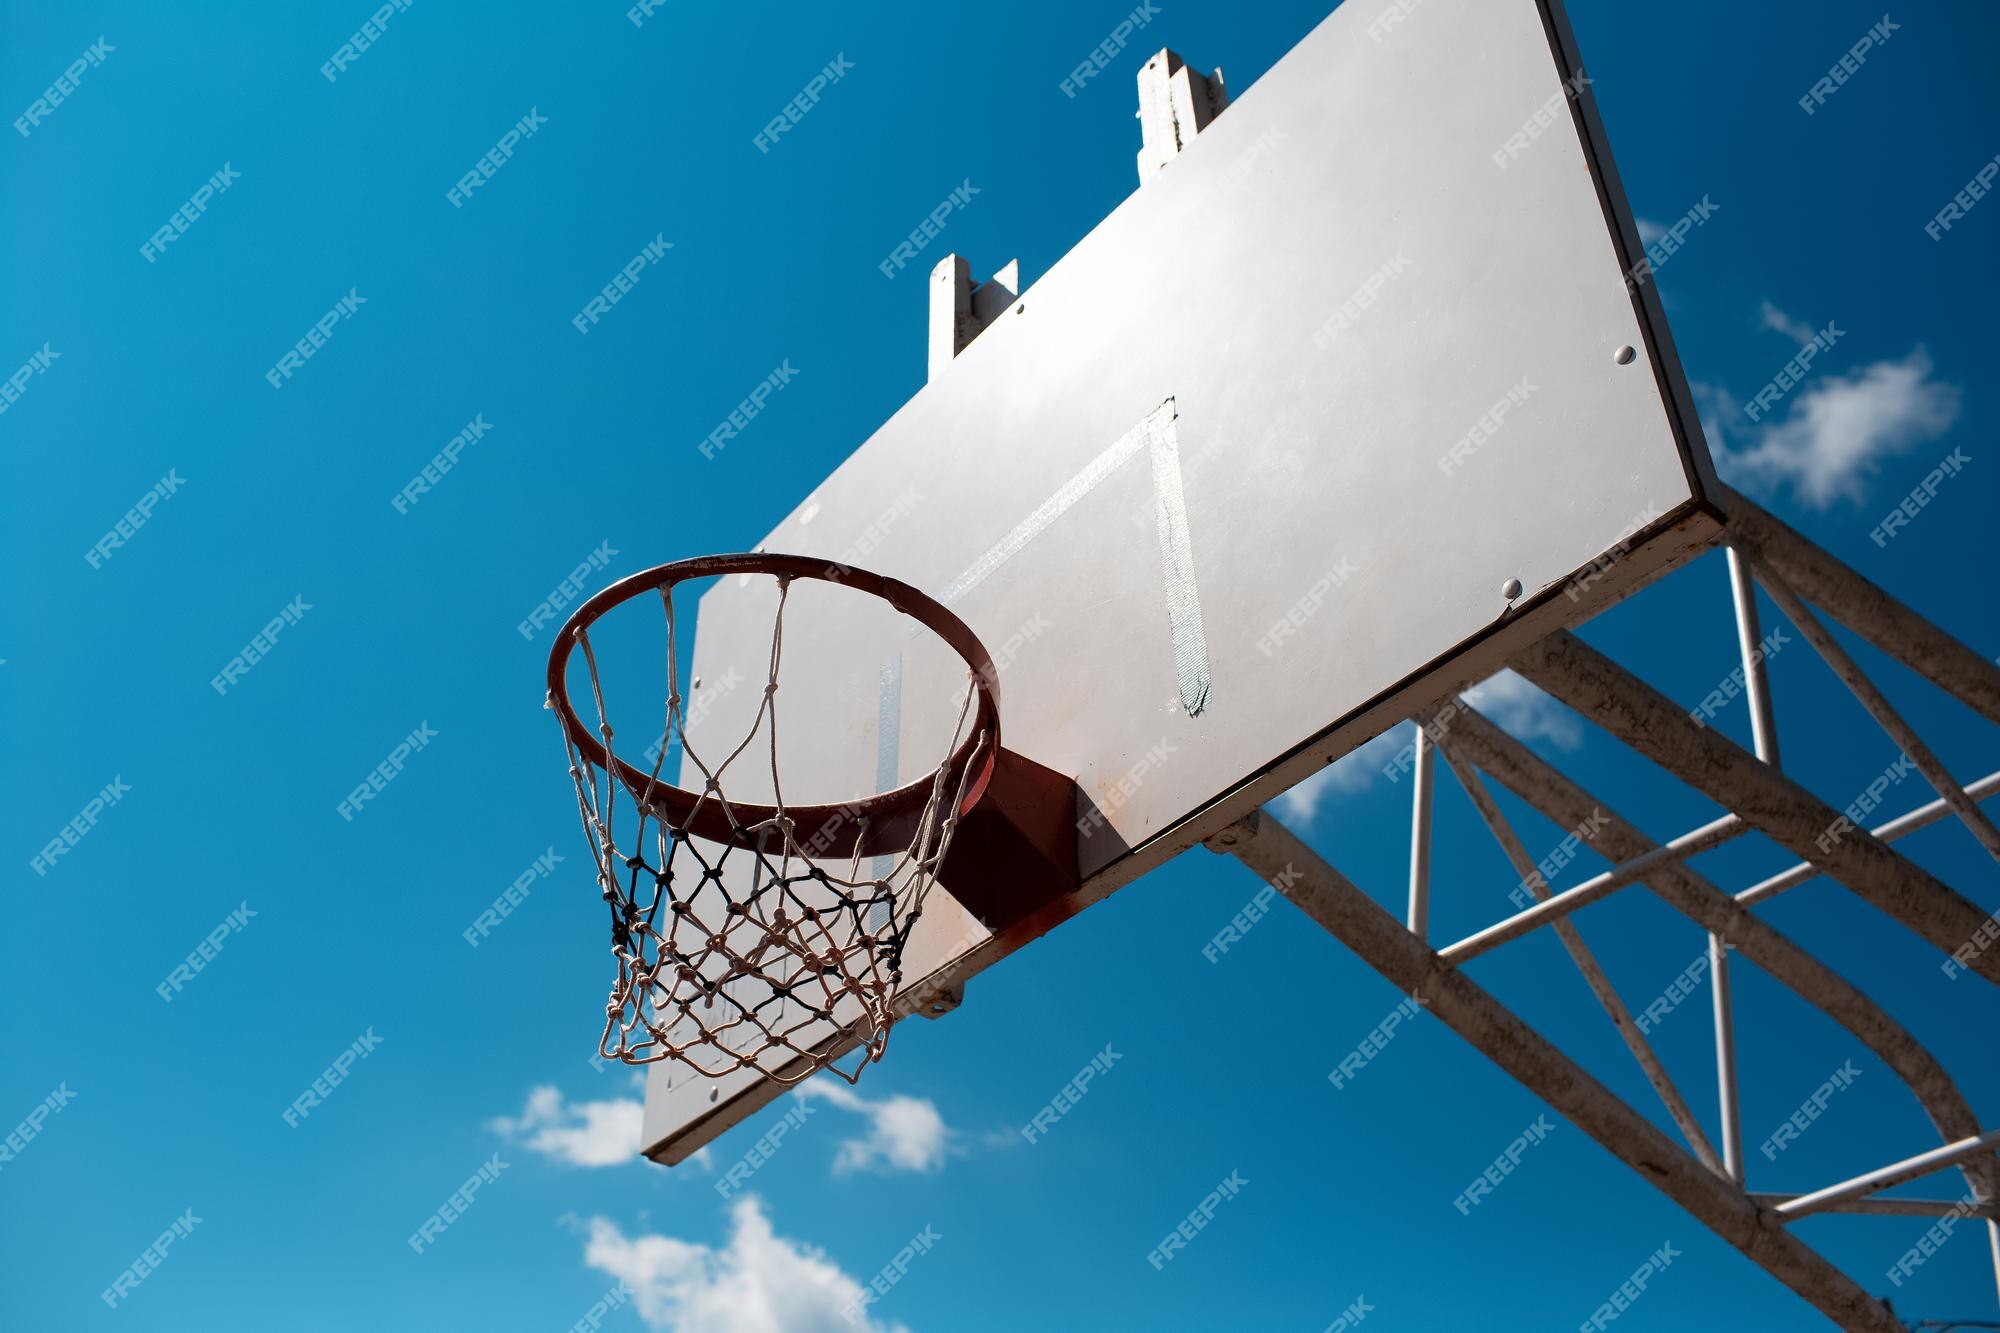 Backboard Images | Free Vectors, Stock Photos & PSD